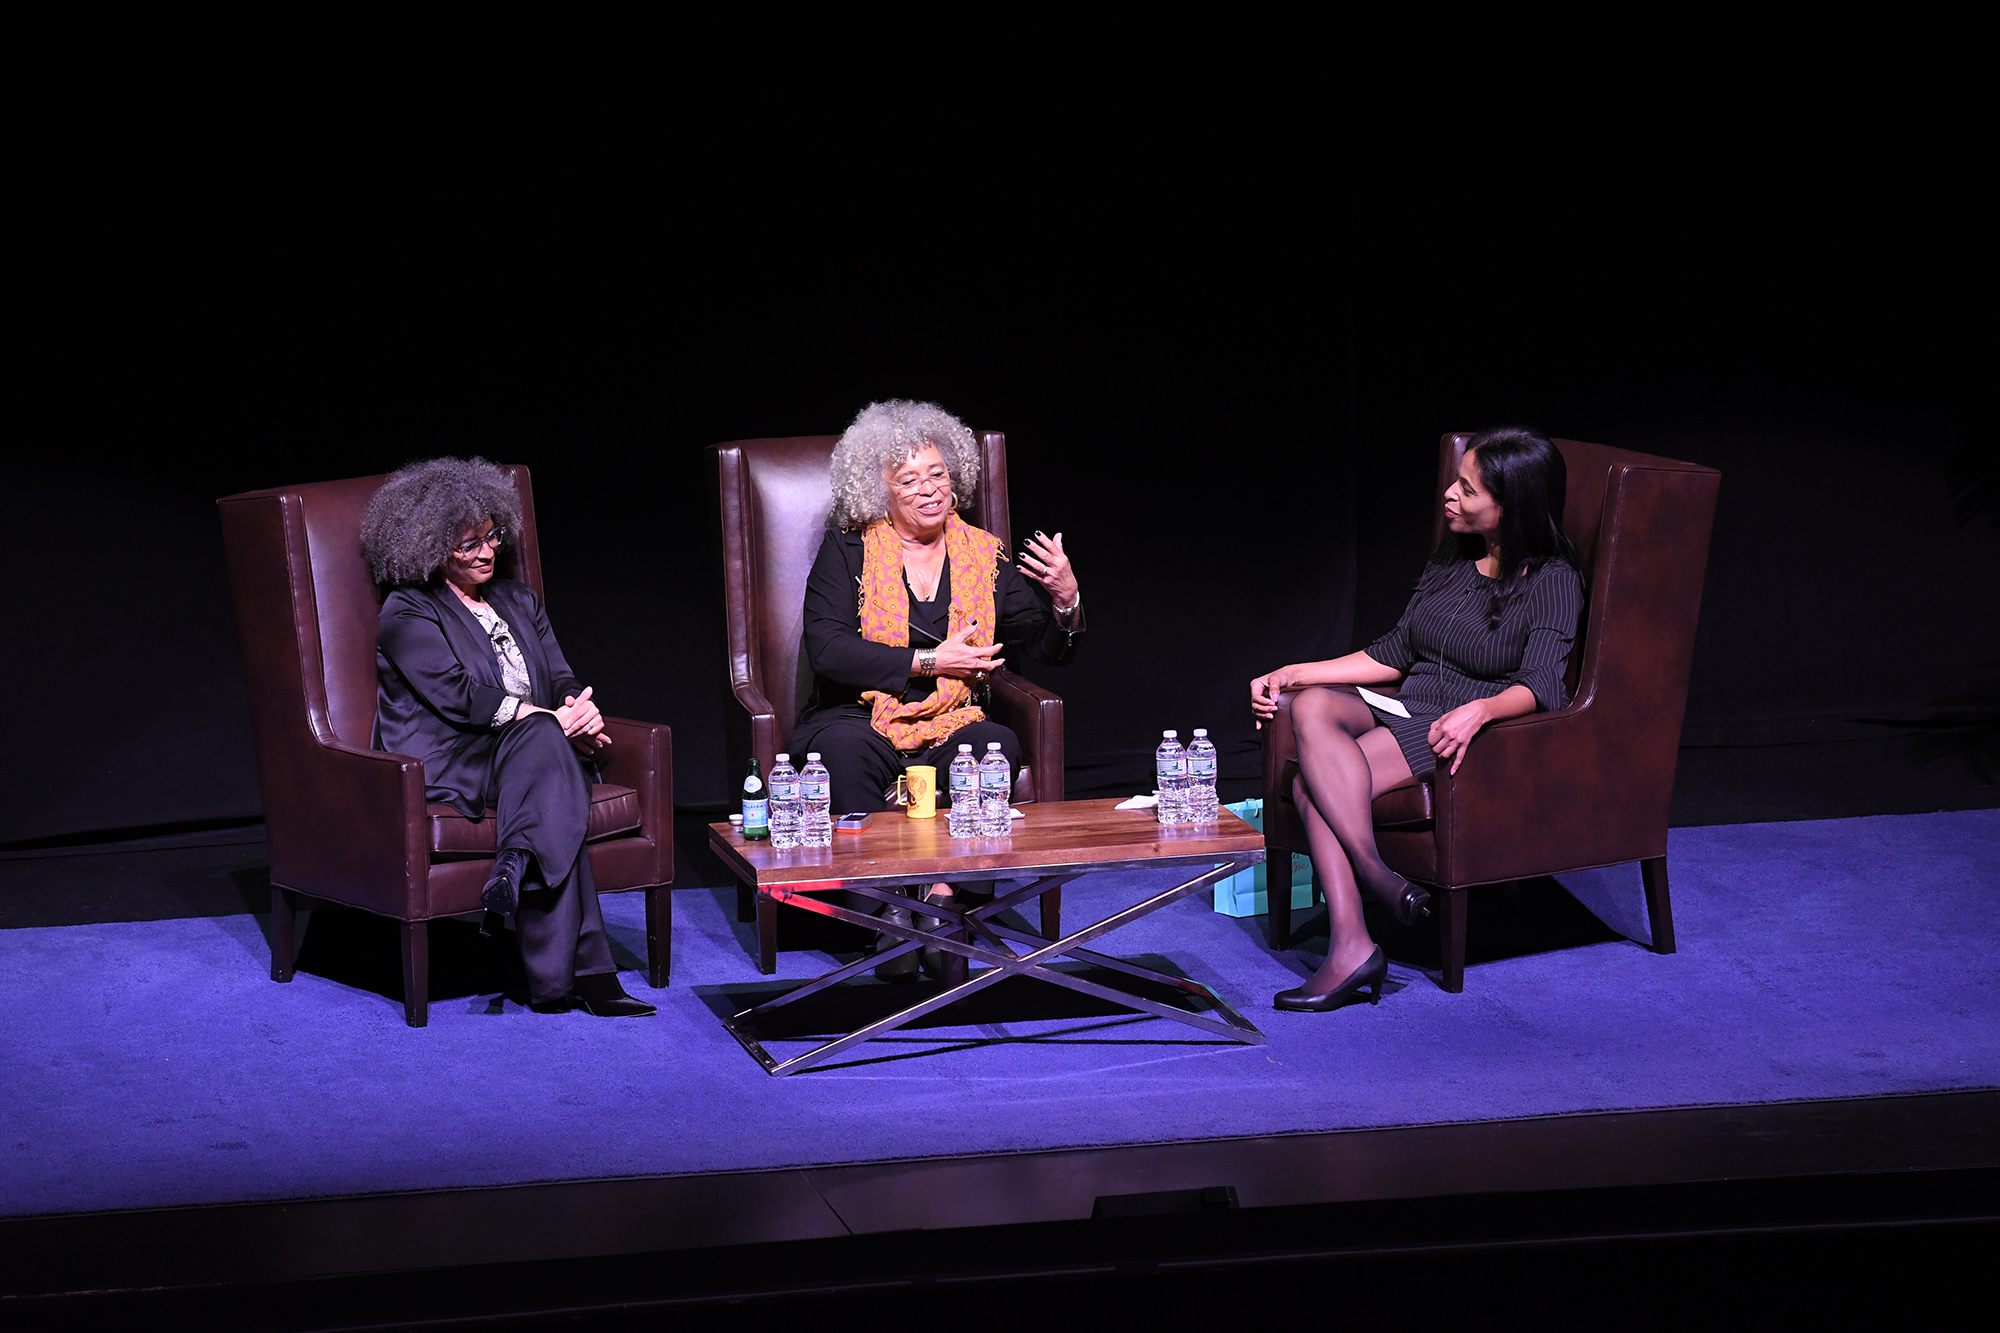 Gina Dent, Angela Davis, and Margo Natalie Crawford seated in discussion on stage.